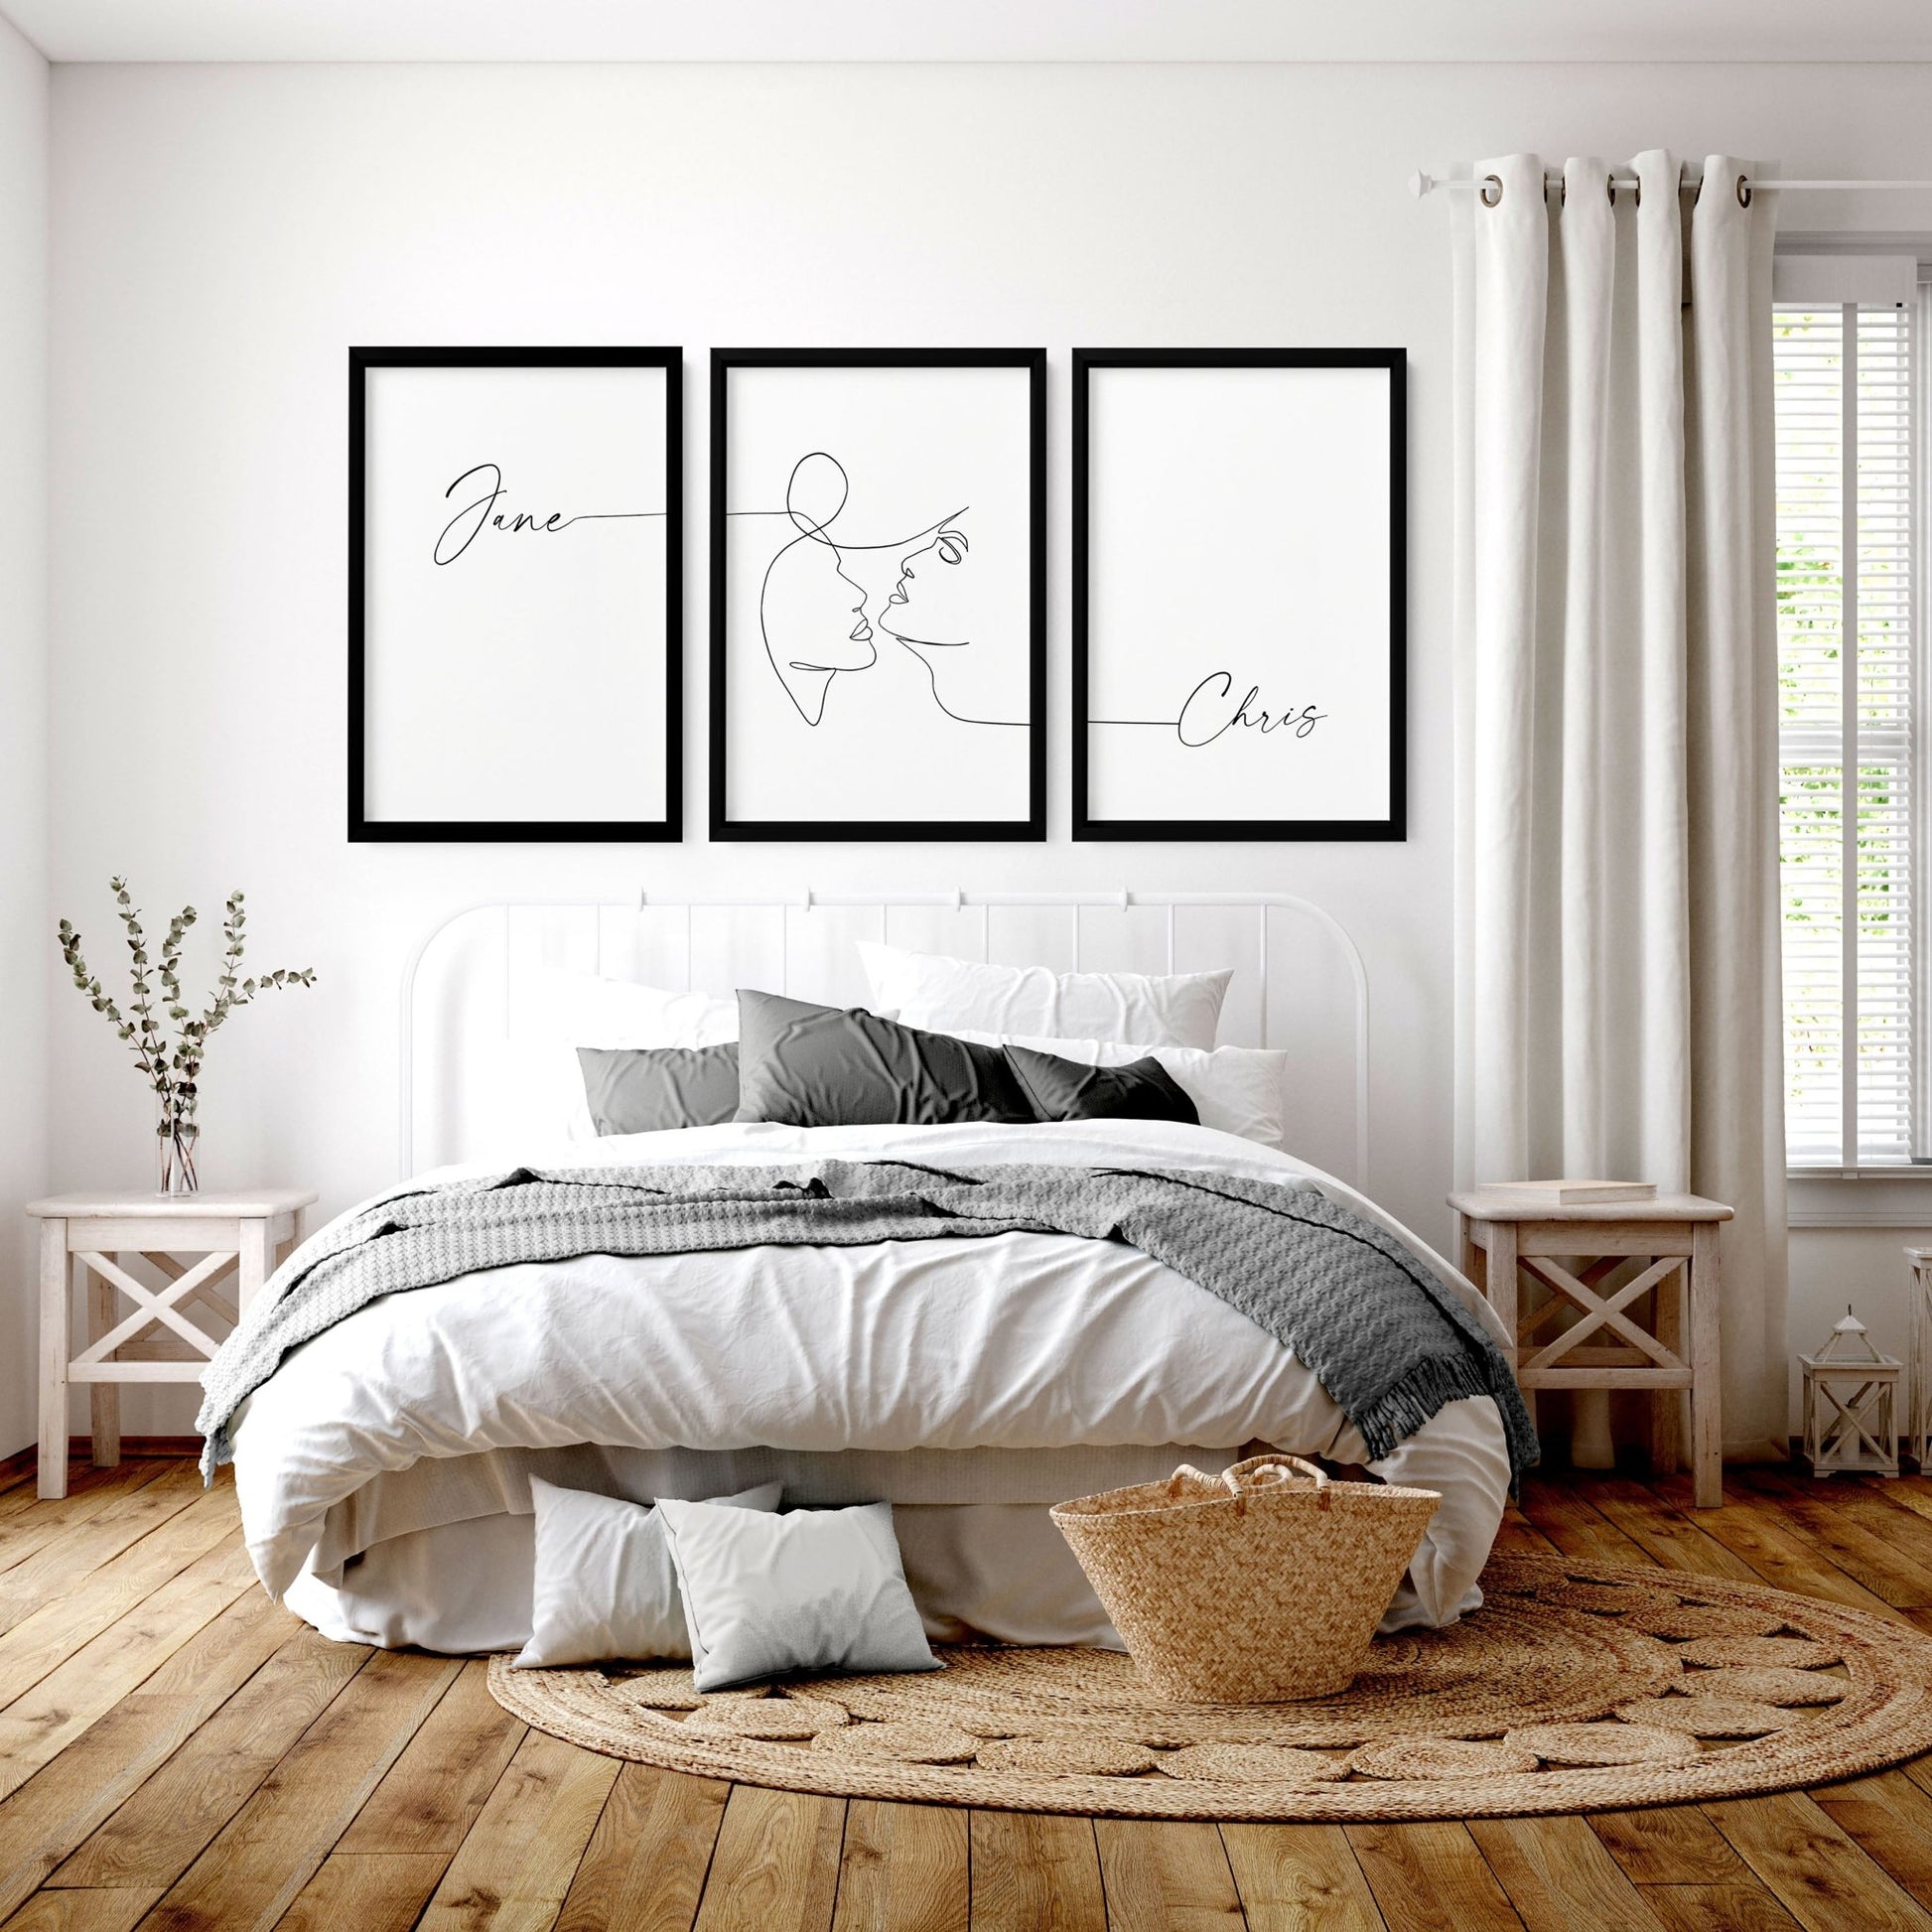 Custom valentines gift | set of 3 wall art prints for Master Bedroom - About Wall Art